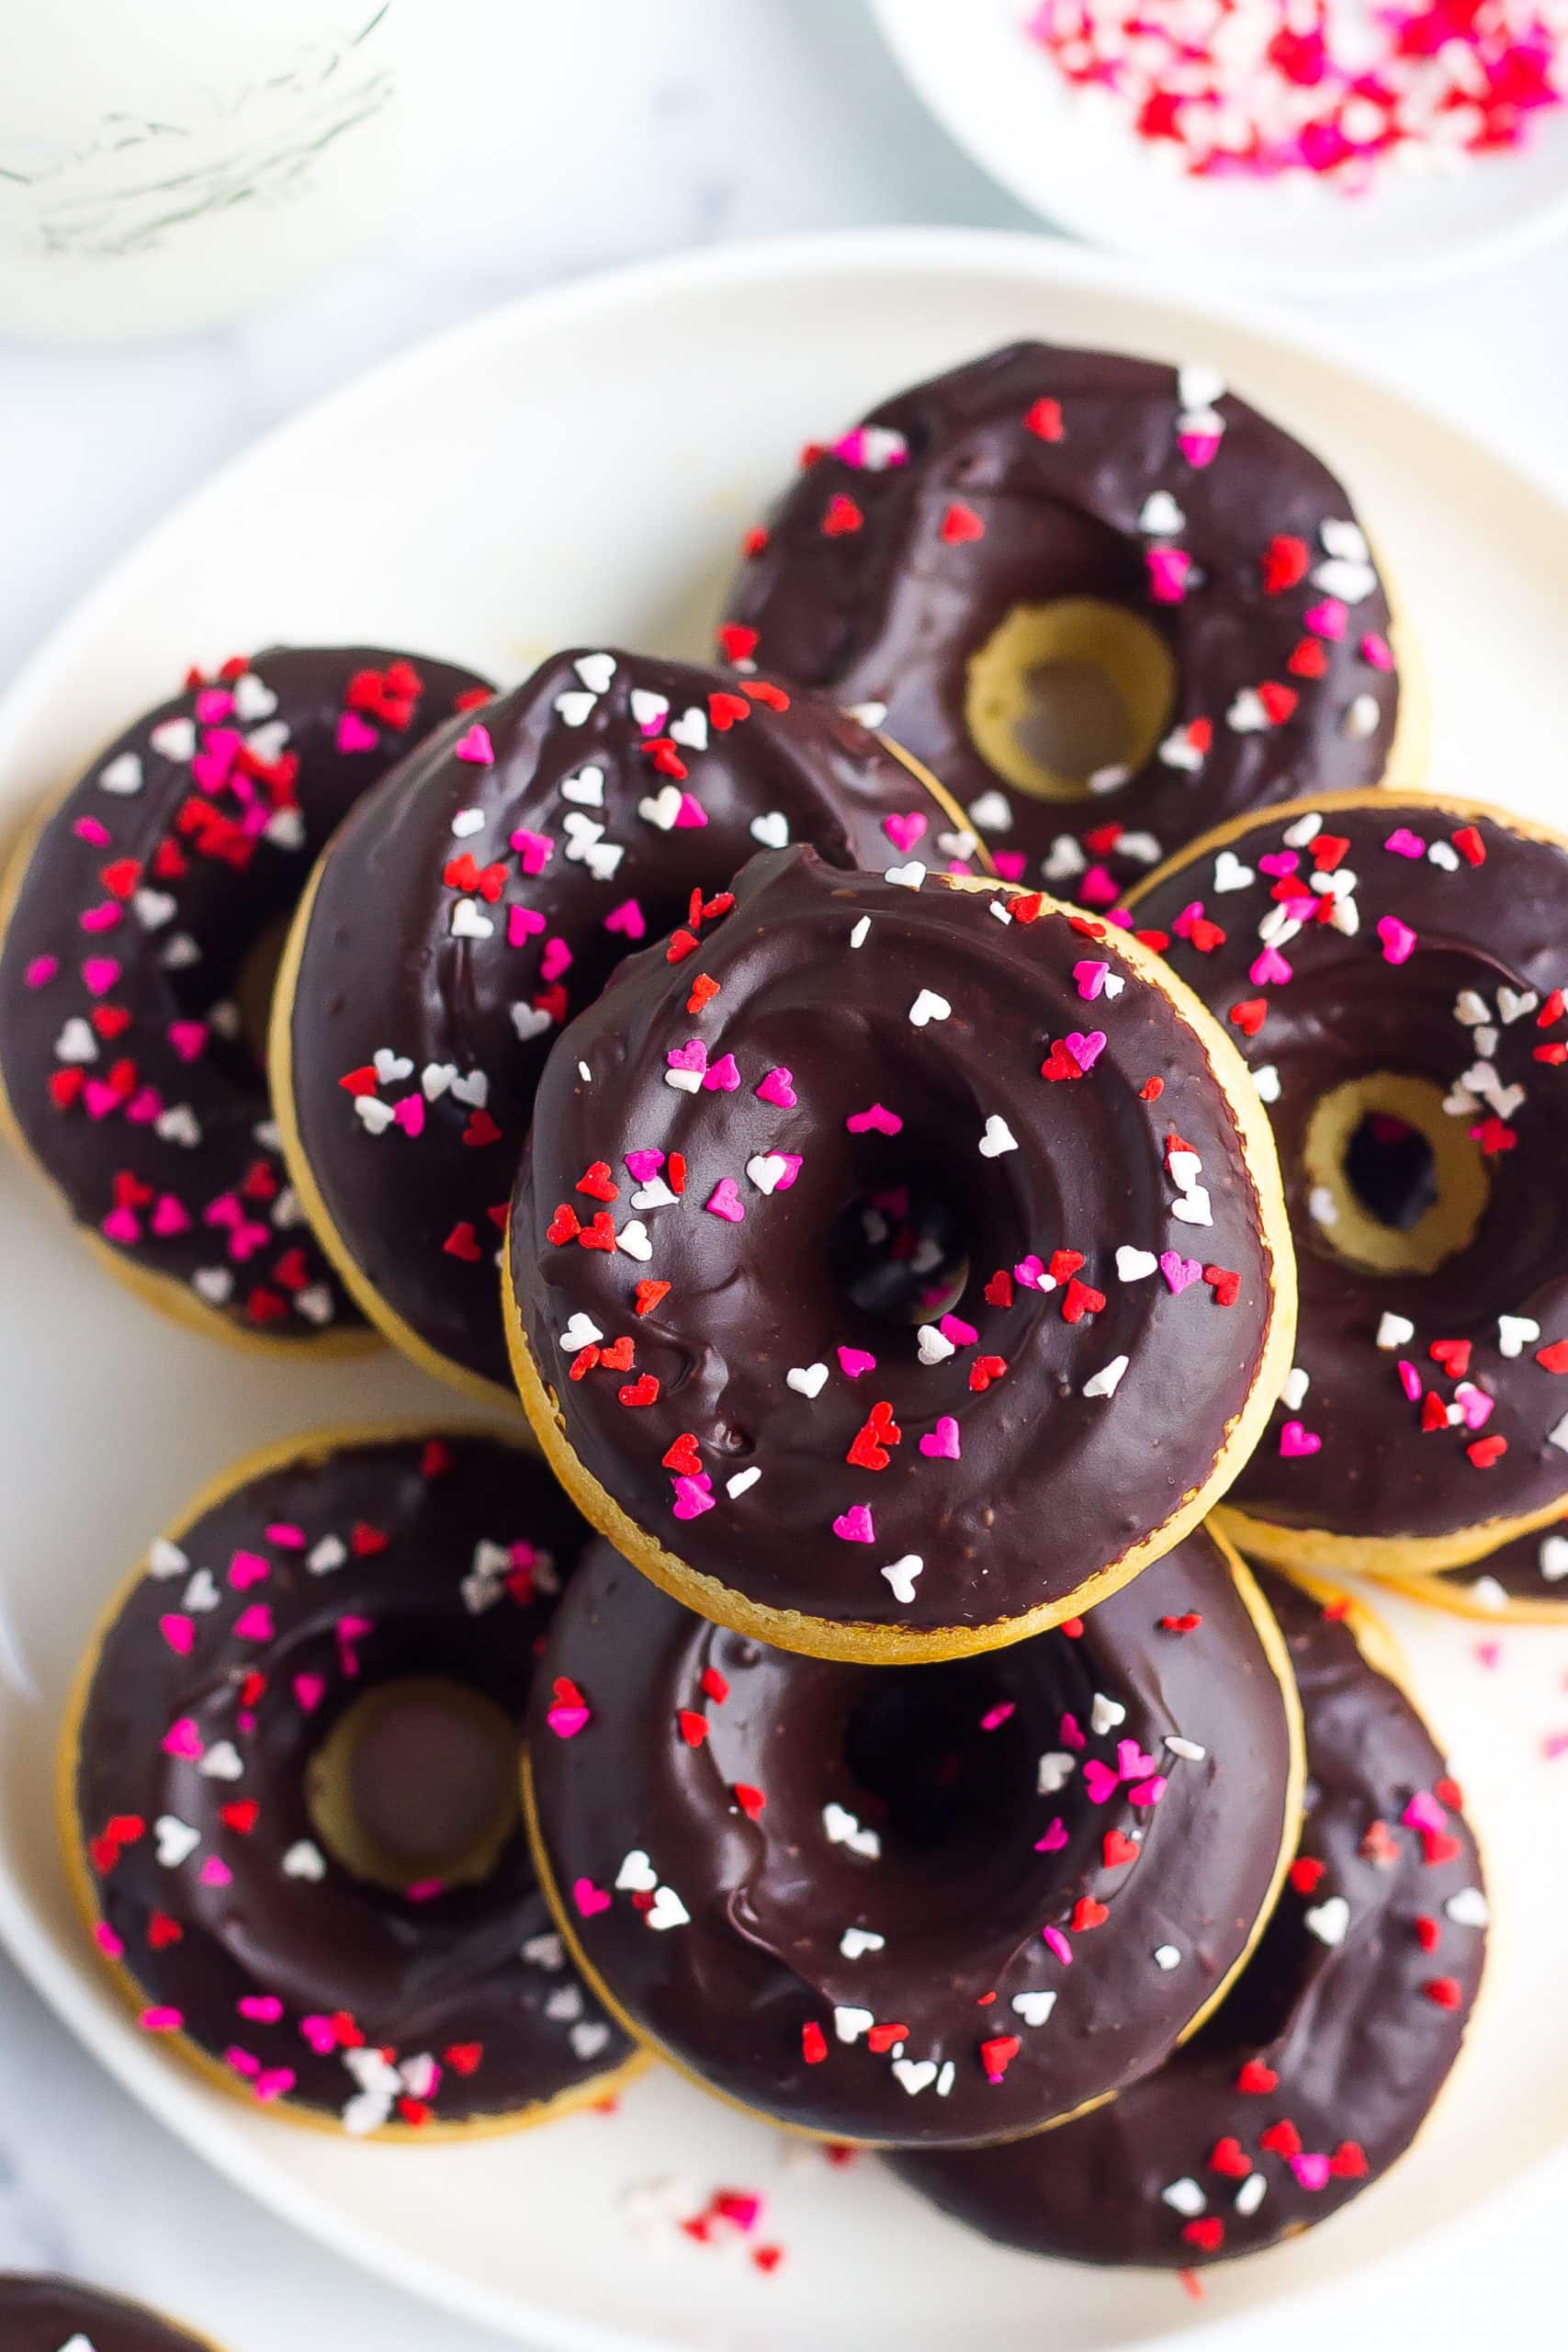 baked donuts on plate with chocolate icing and sprinkles